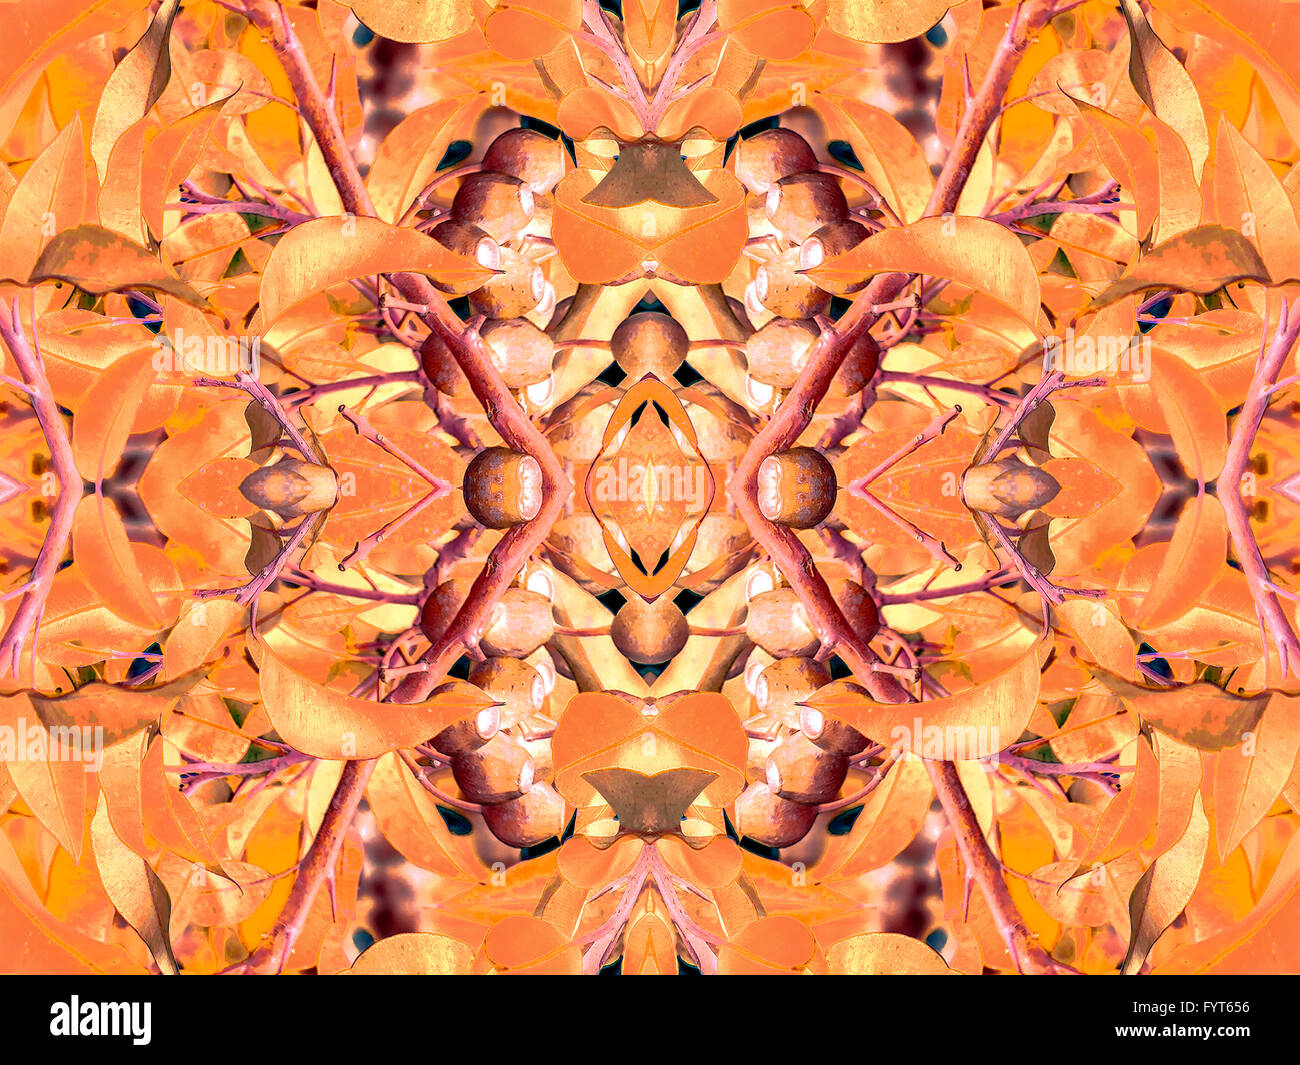 Digital collage and manipulation technique nature floral collage motif seamless pattern mosaic in vivid orange tones. Stock Photo